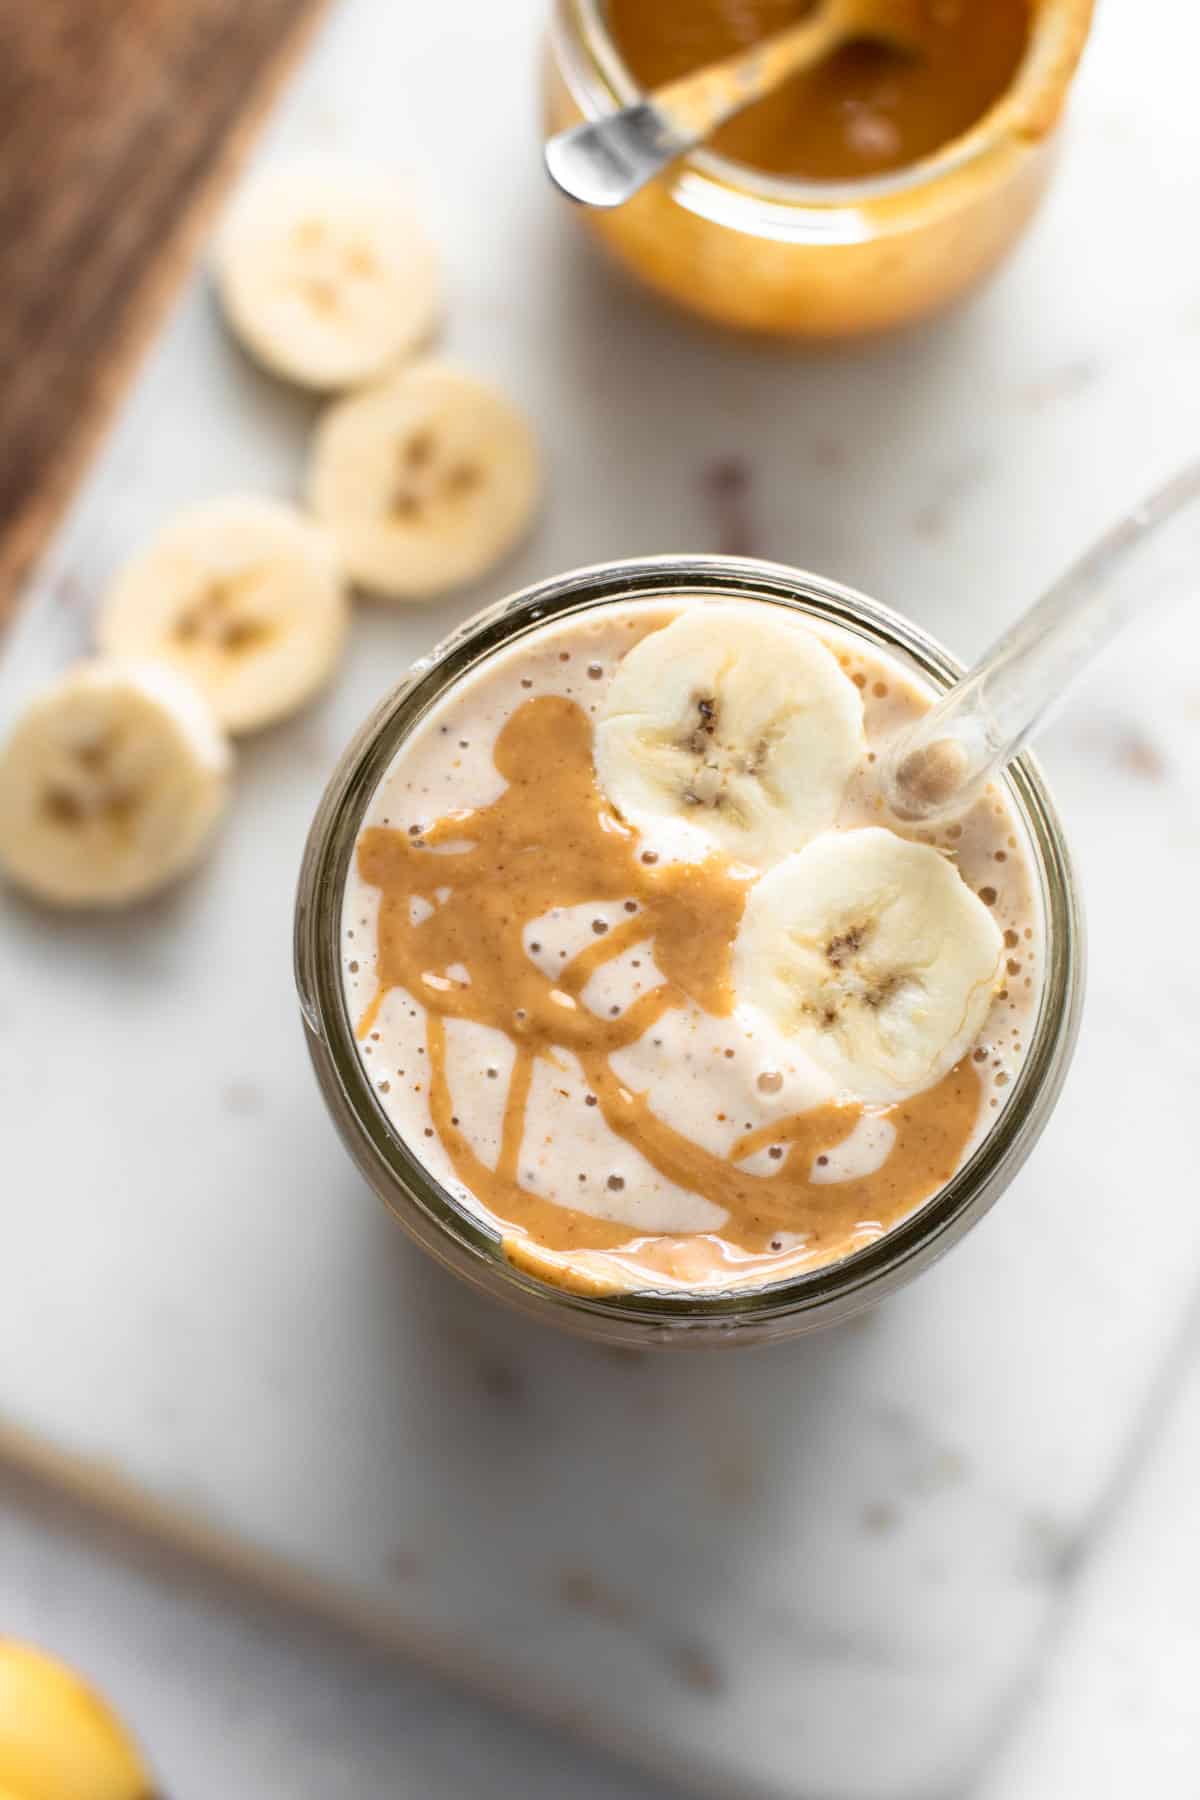 Healthy Peanut Butter Banana Smoothie - Lexi's Clean Kitchen